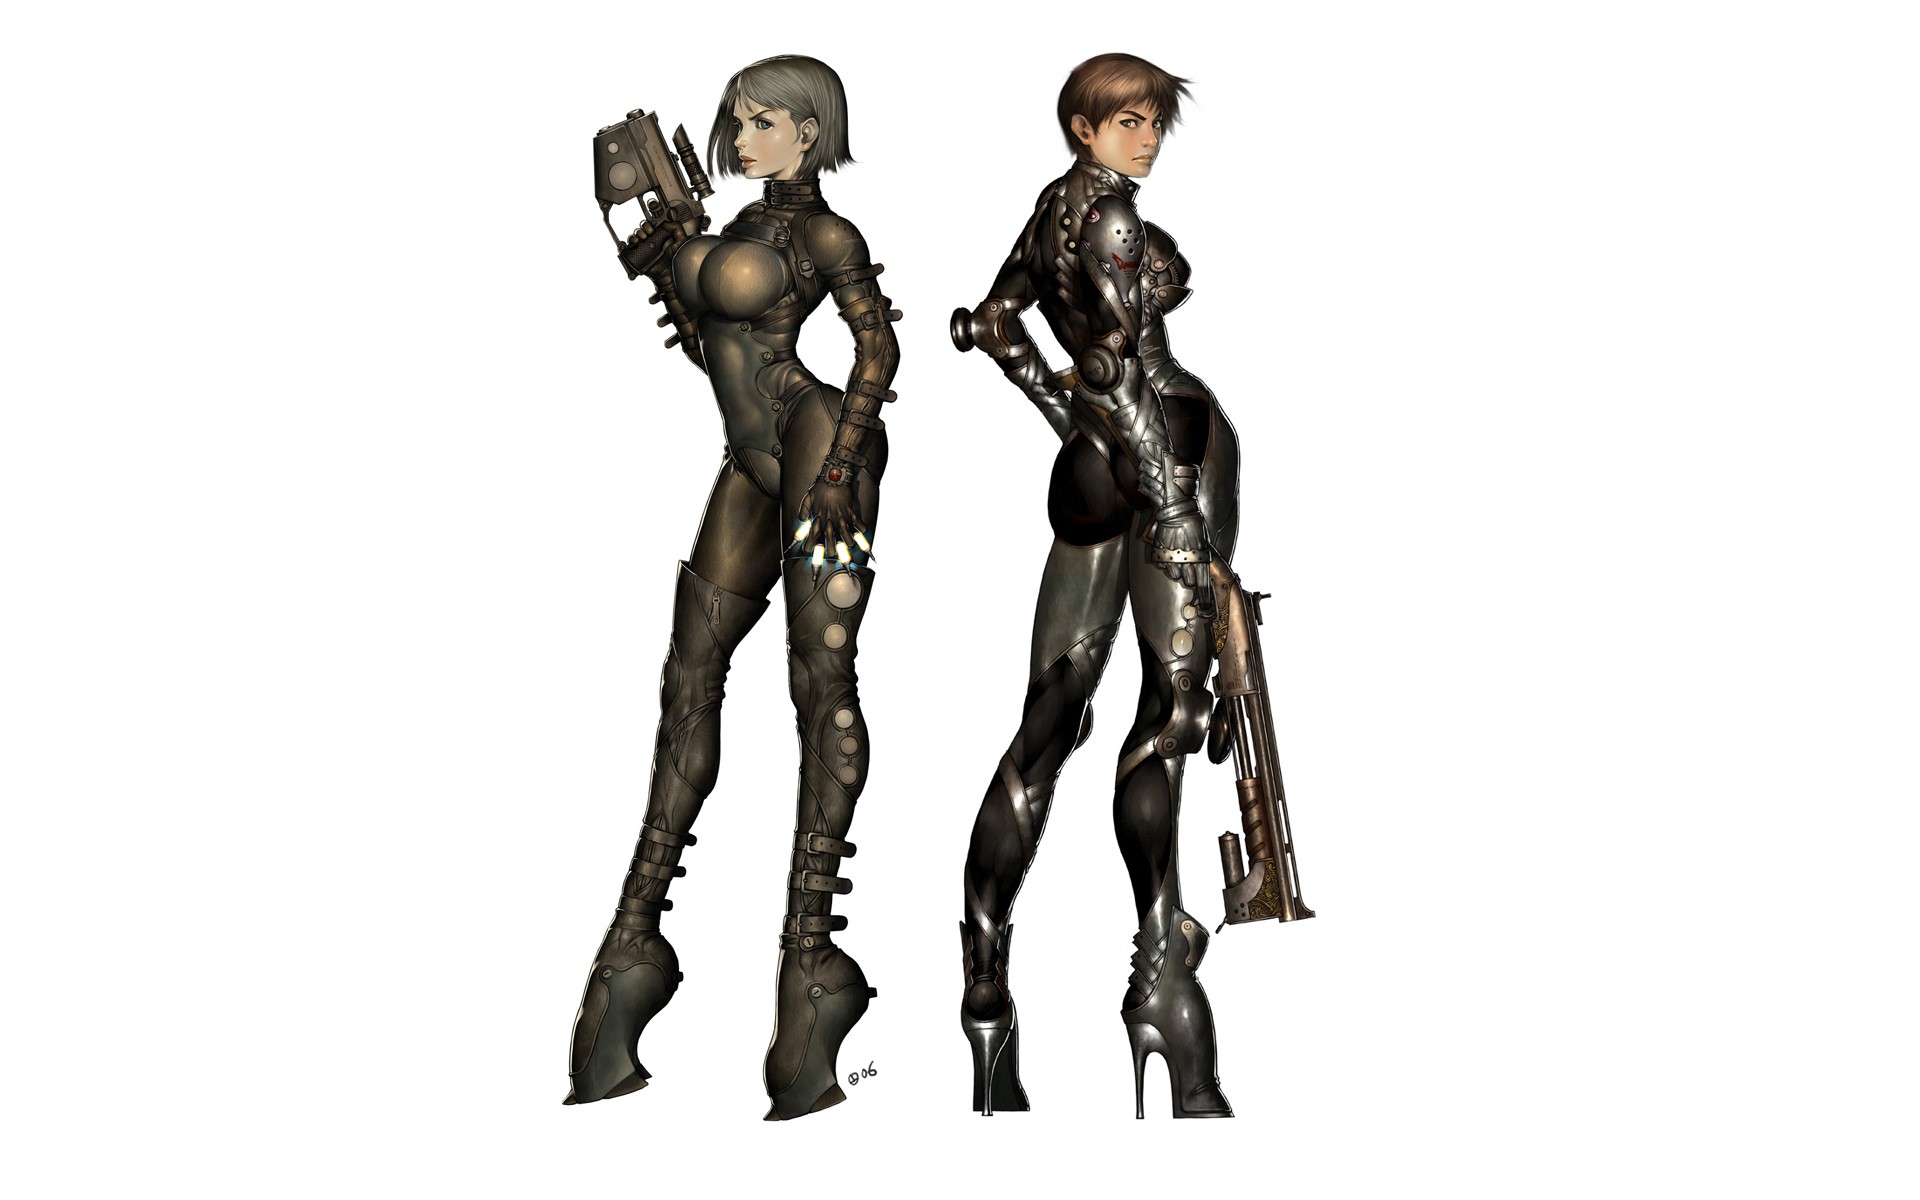 Anime 1920x1200 Kyoungseok Oh high heels armor gun women short hair white background anime girls anime simple background big boobs science fiction science fiction women standing weapon